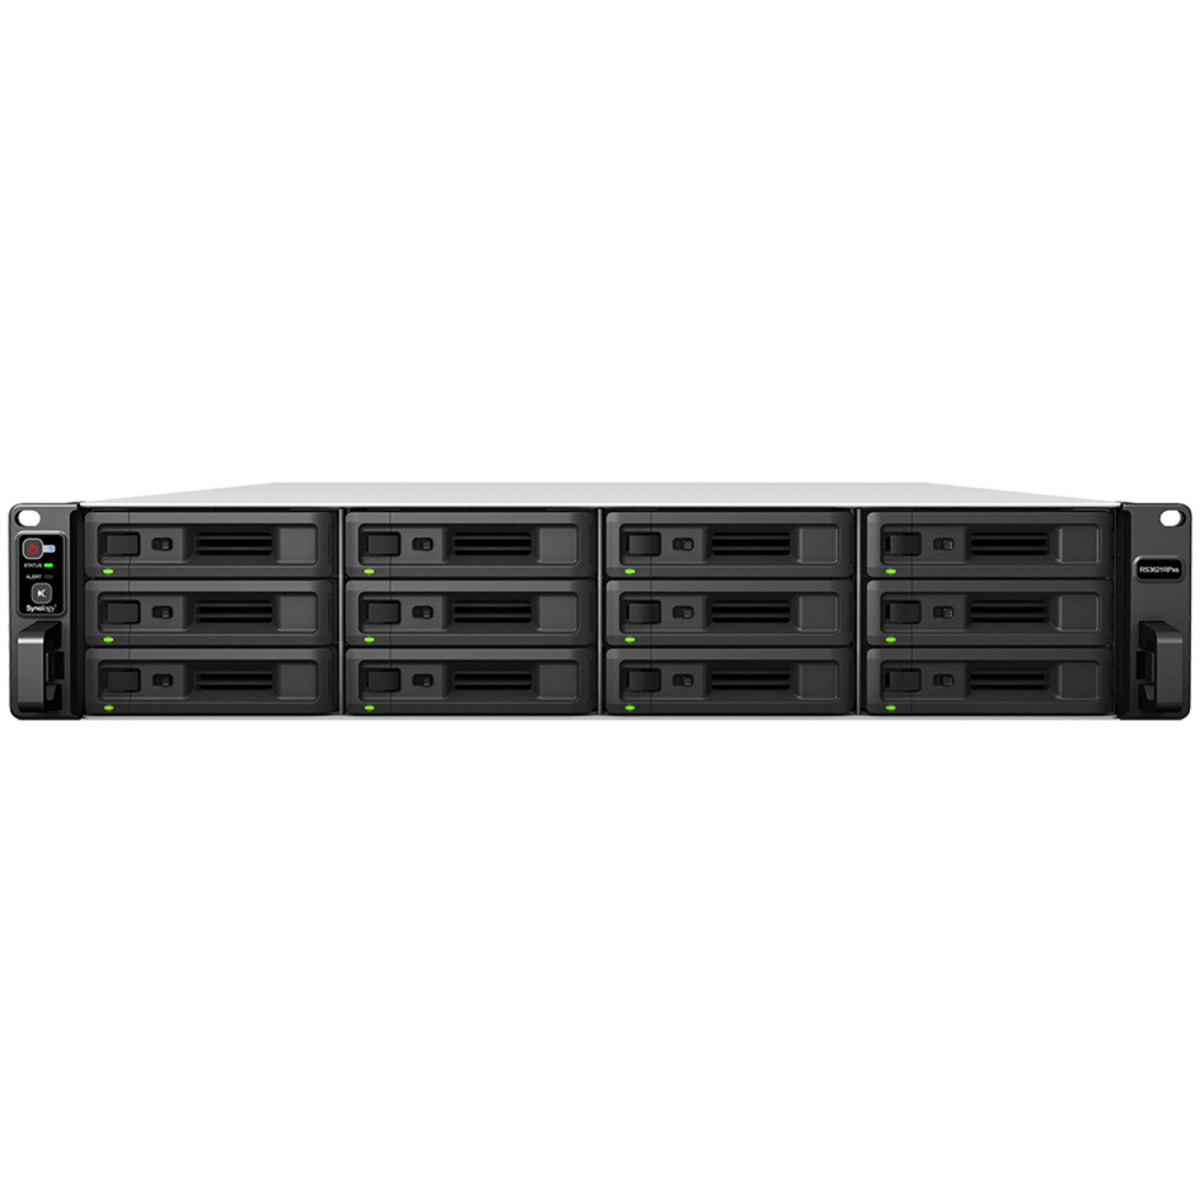 buy $5573 Synology RackStation RS3621RPxs 48tb RackMount NAS - Network Attached Storage Device 12x4000gb Western Digital Blue WD40EZRZ 3.5 5400rpm SATA 6Gb/s HDD CONSUMER Class Drives Installed - Burn-In Tested - nas headquarters buy network attached storage server device das new raid-5 free shipping usa christmas new year holiday sale RackStation RS3621RPxs